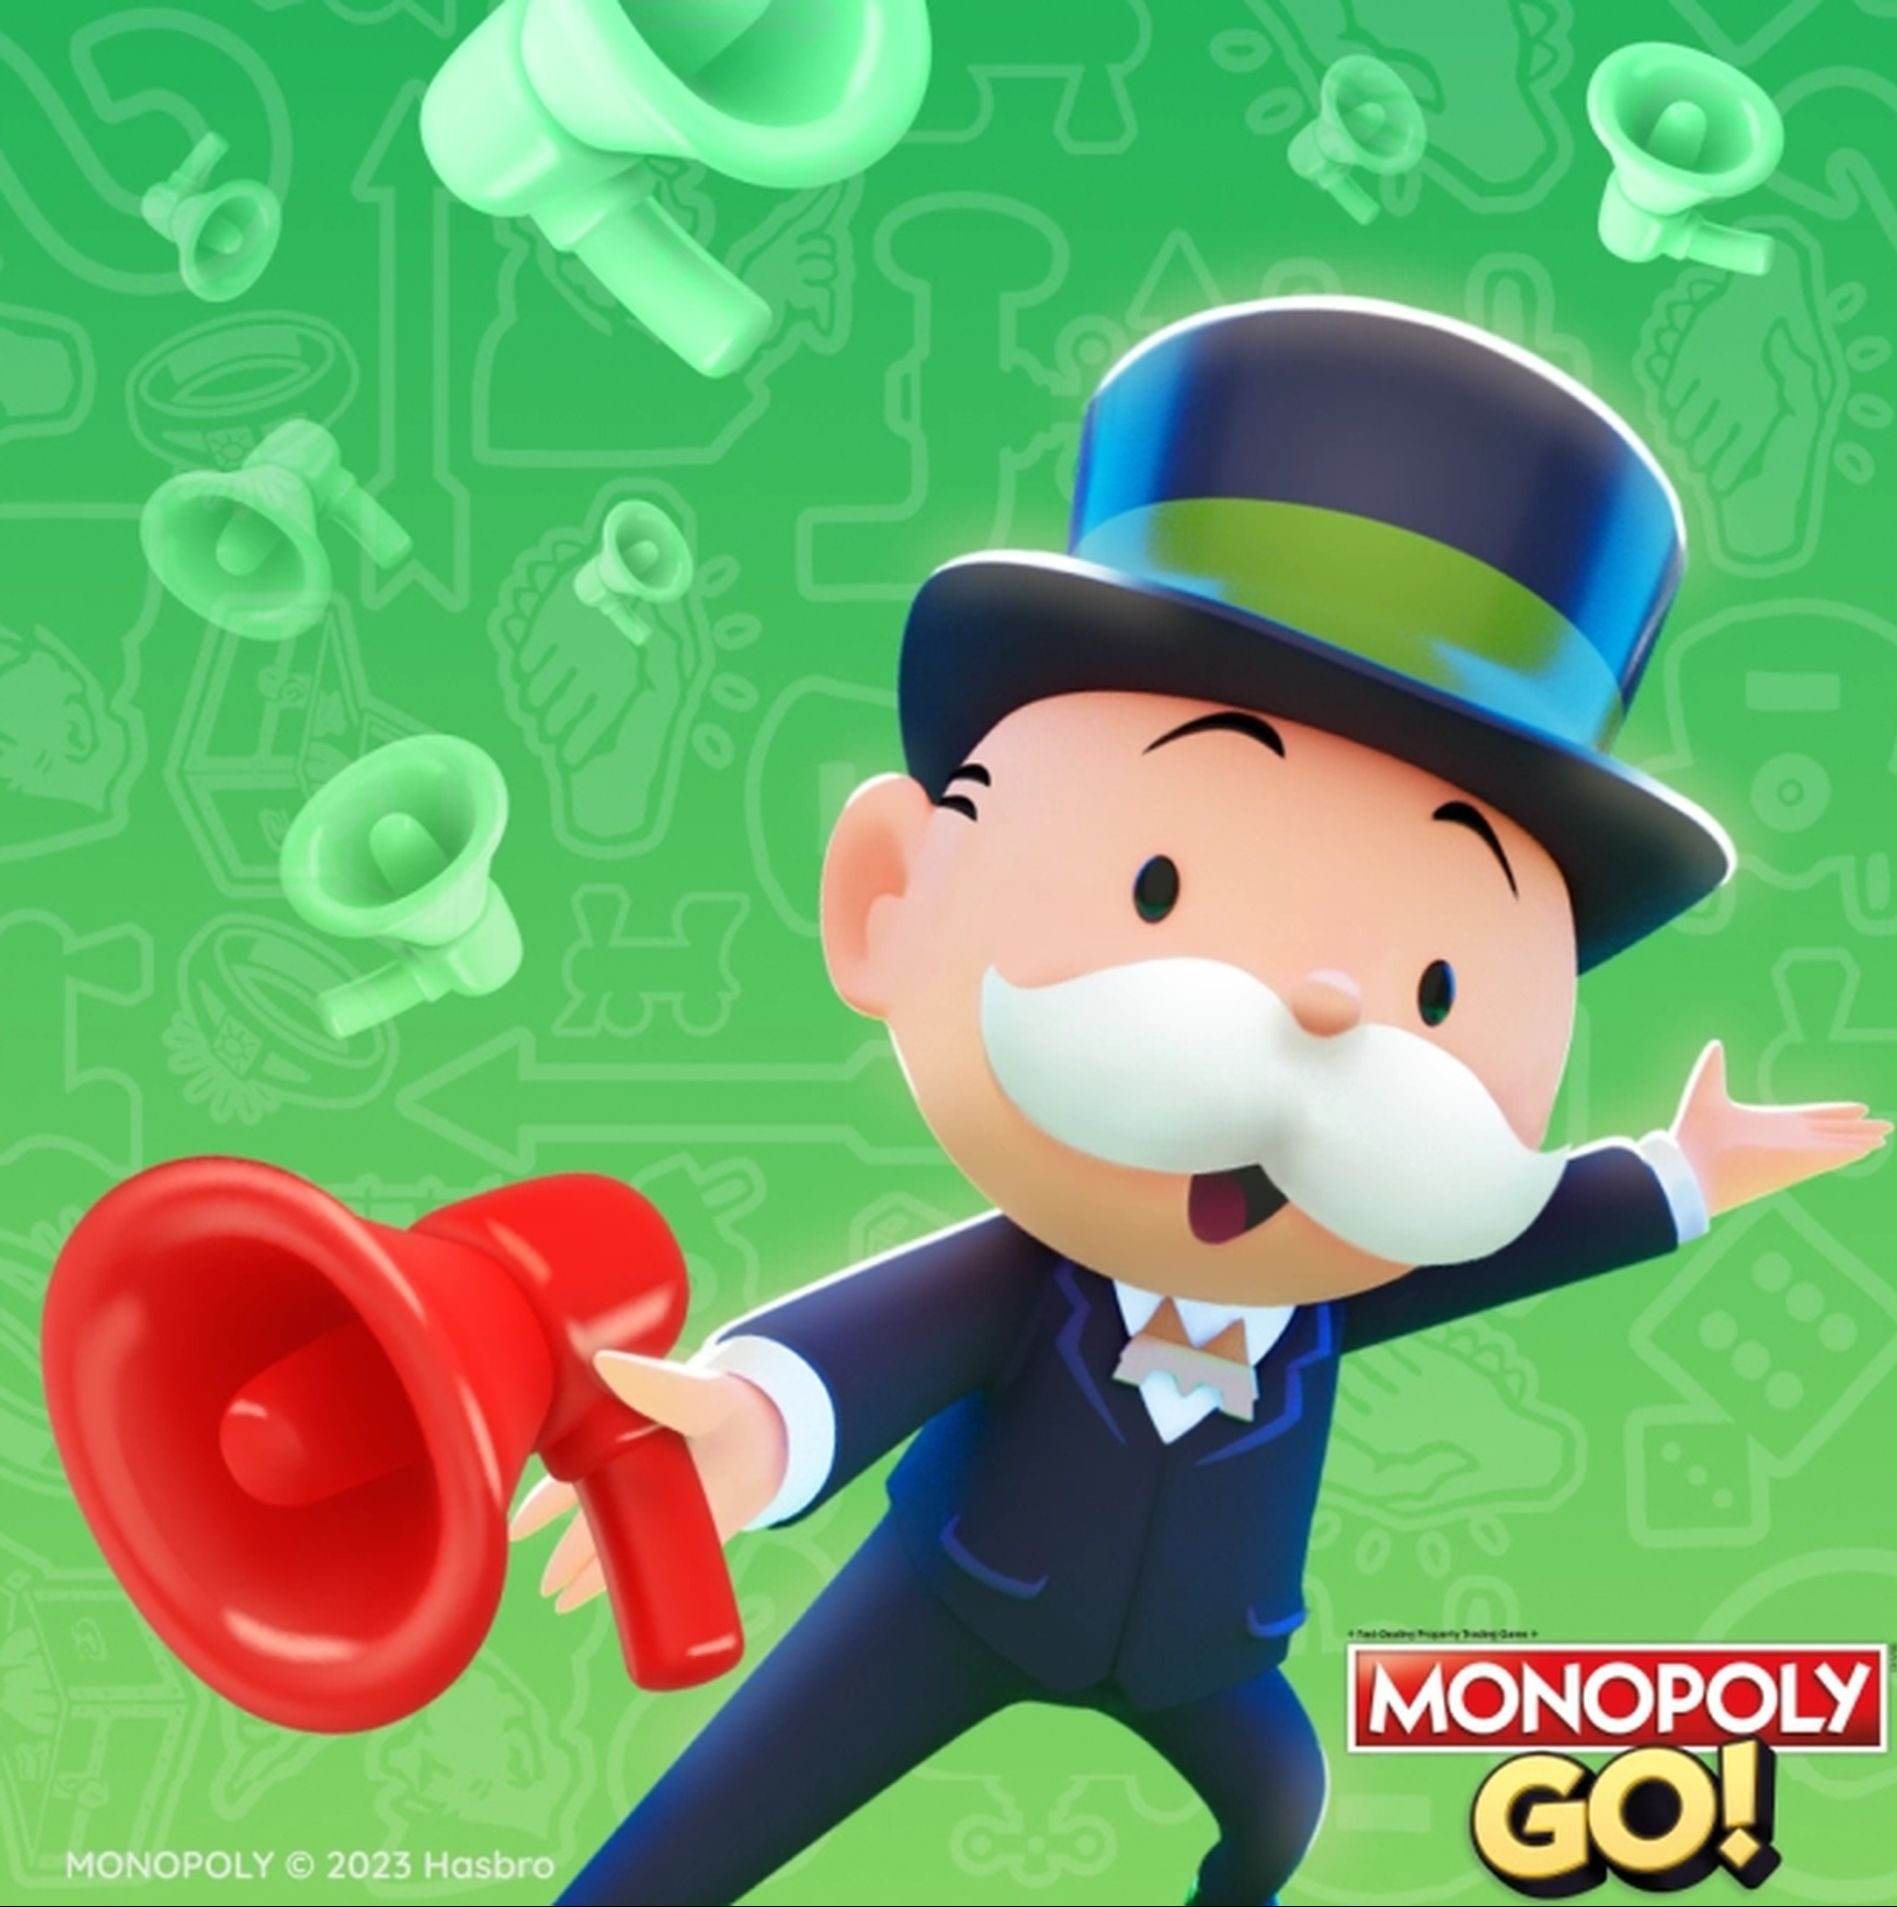 Roll the dice: A guide to Monopoly Go Free Dice links